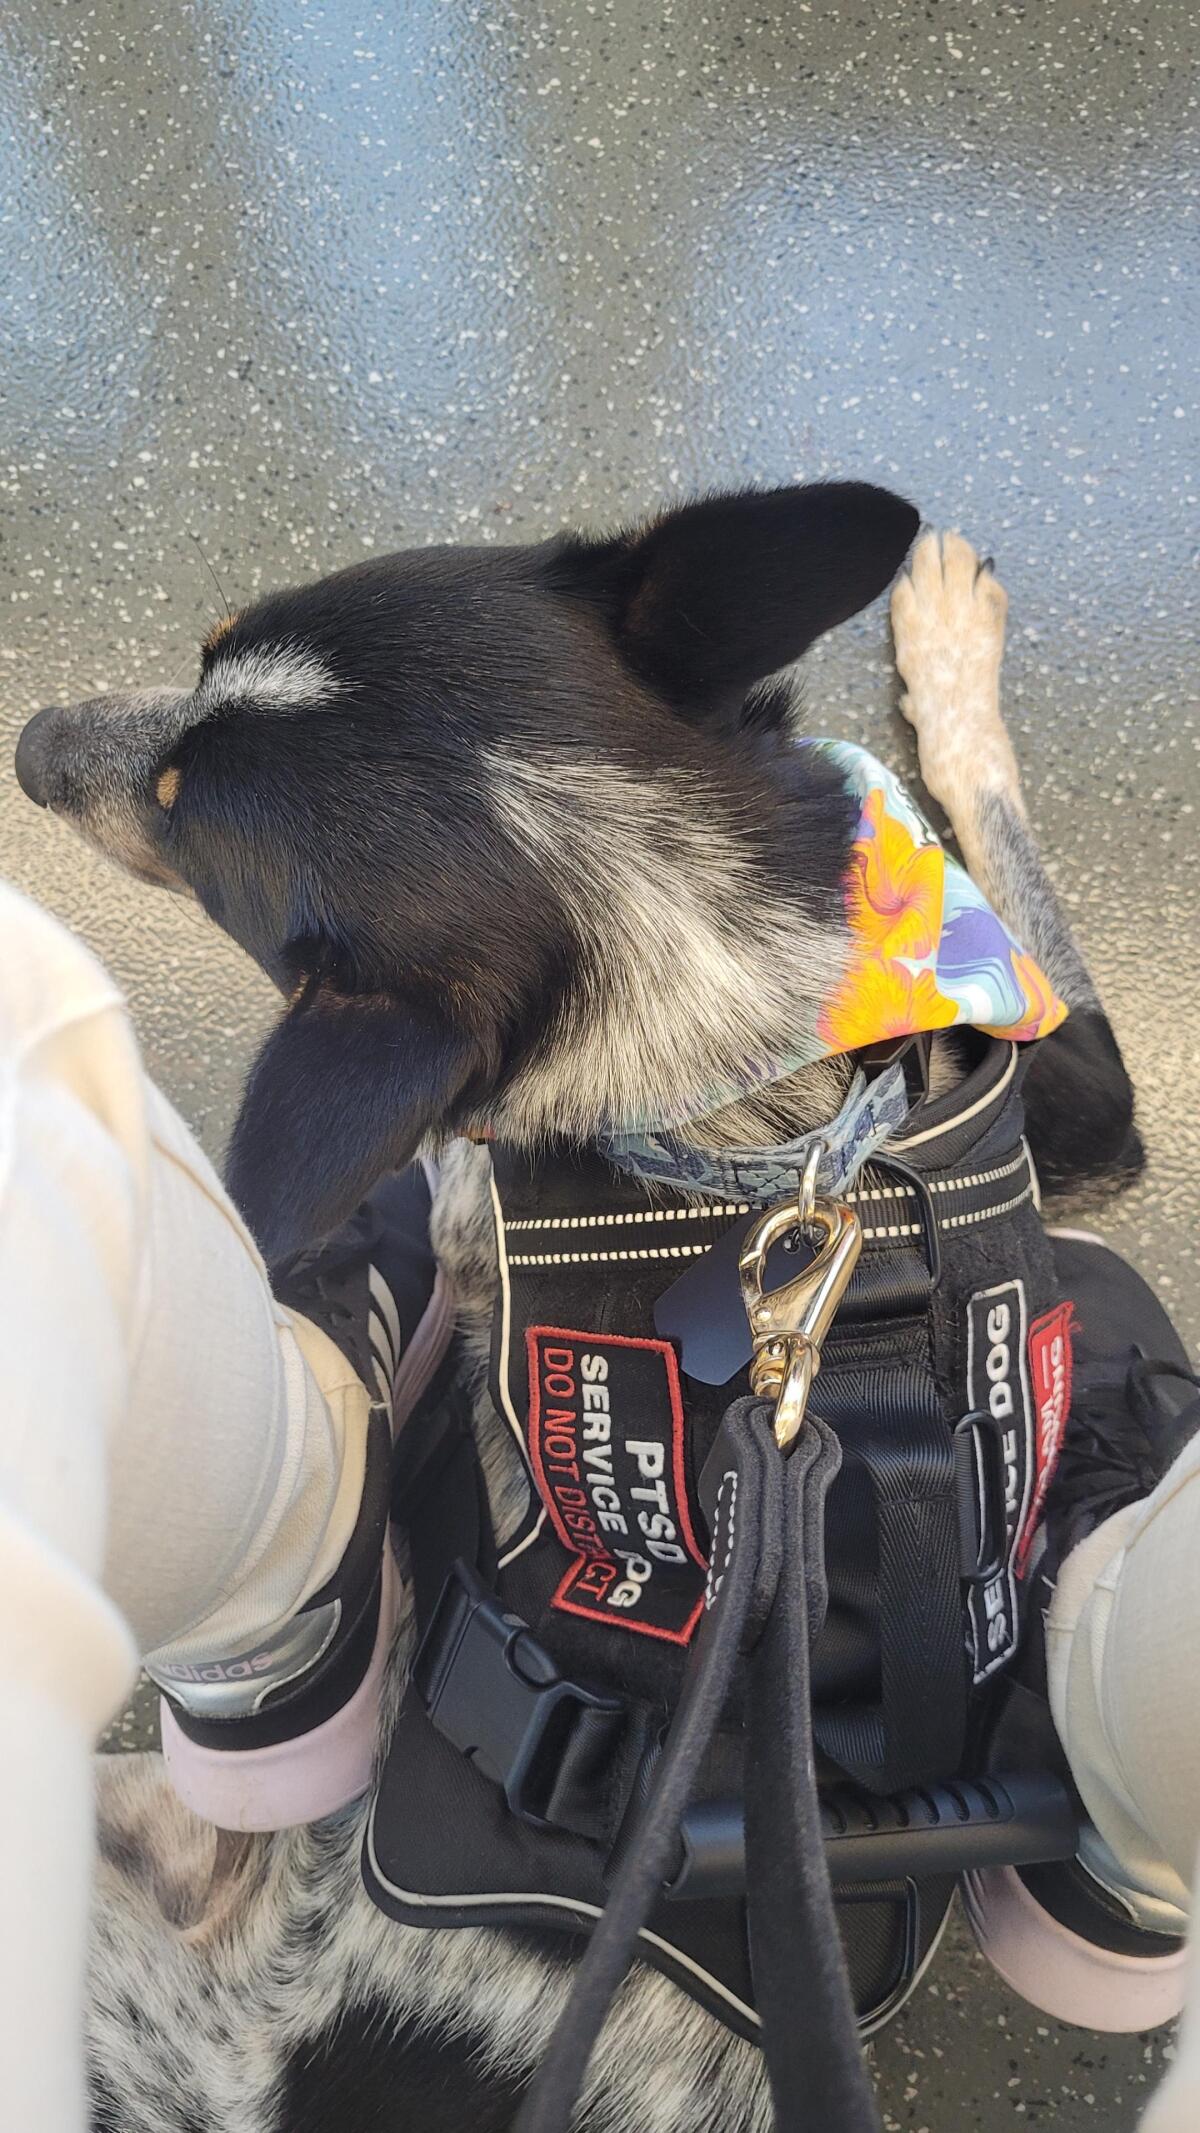 Meeka's vest shows she is a working service dog.